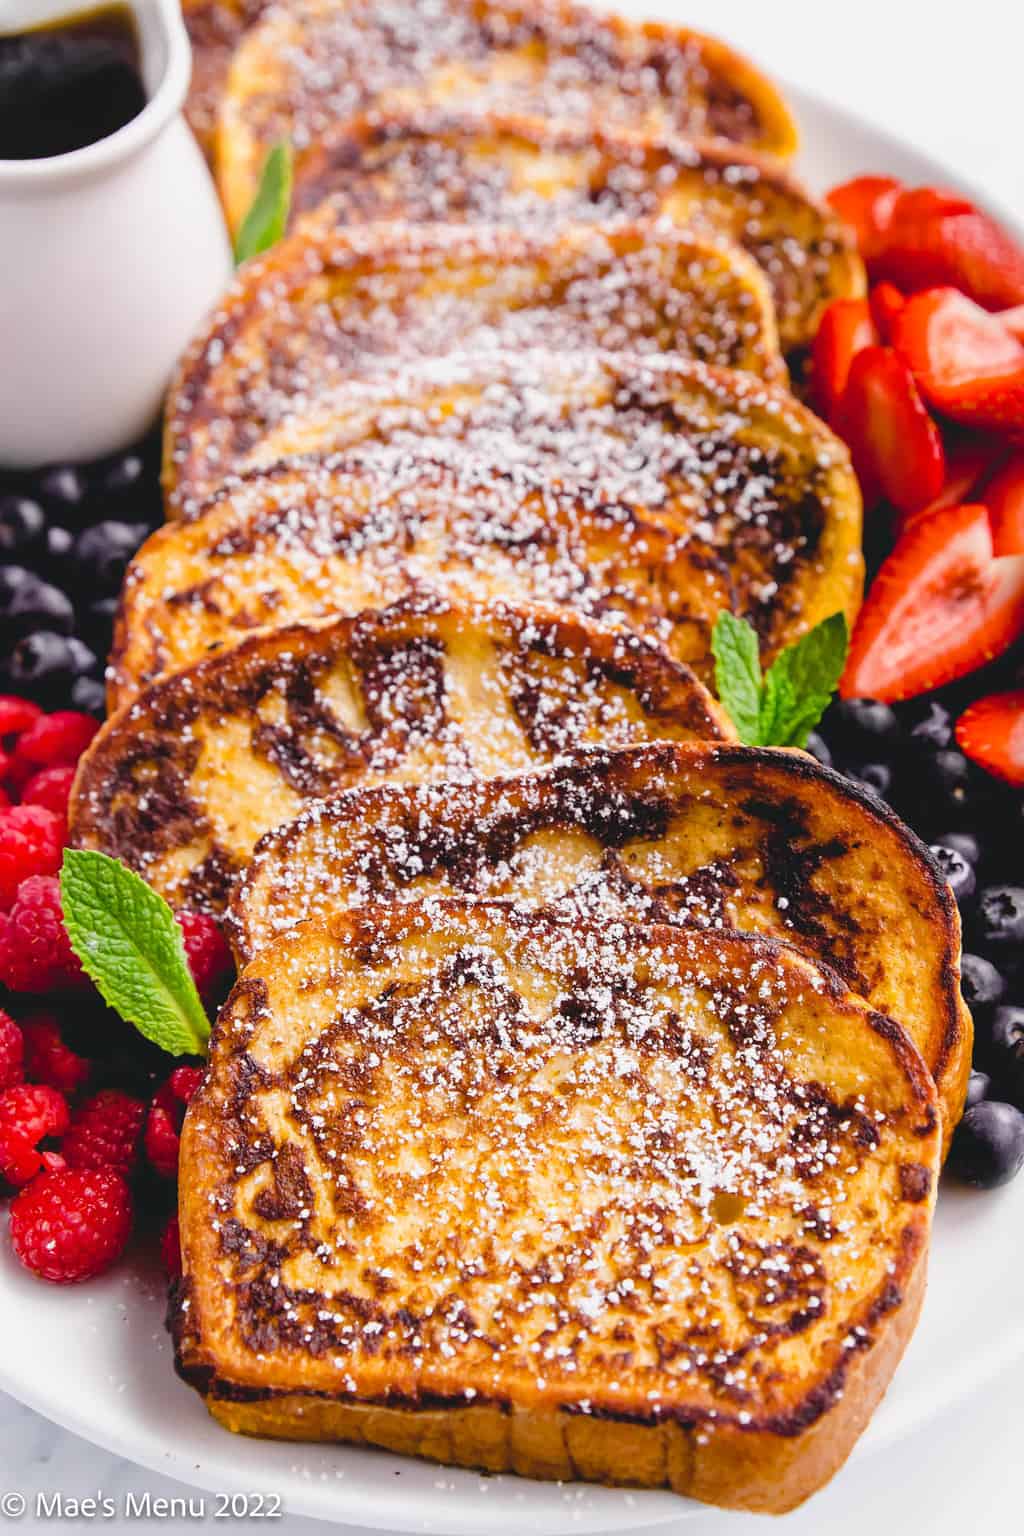 A plate of brioche french toast with berries.